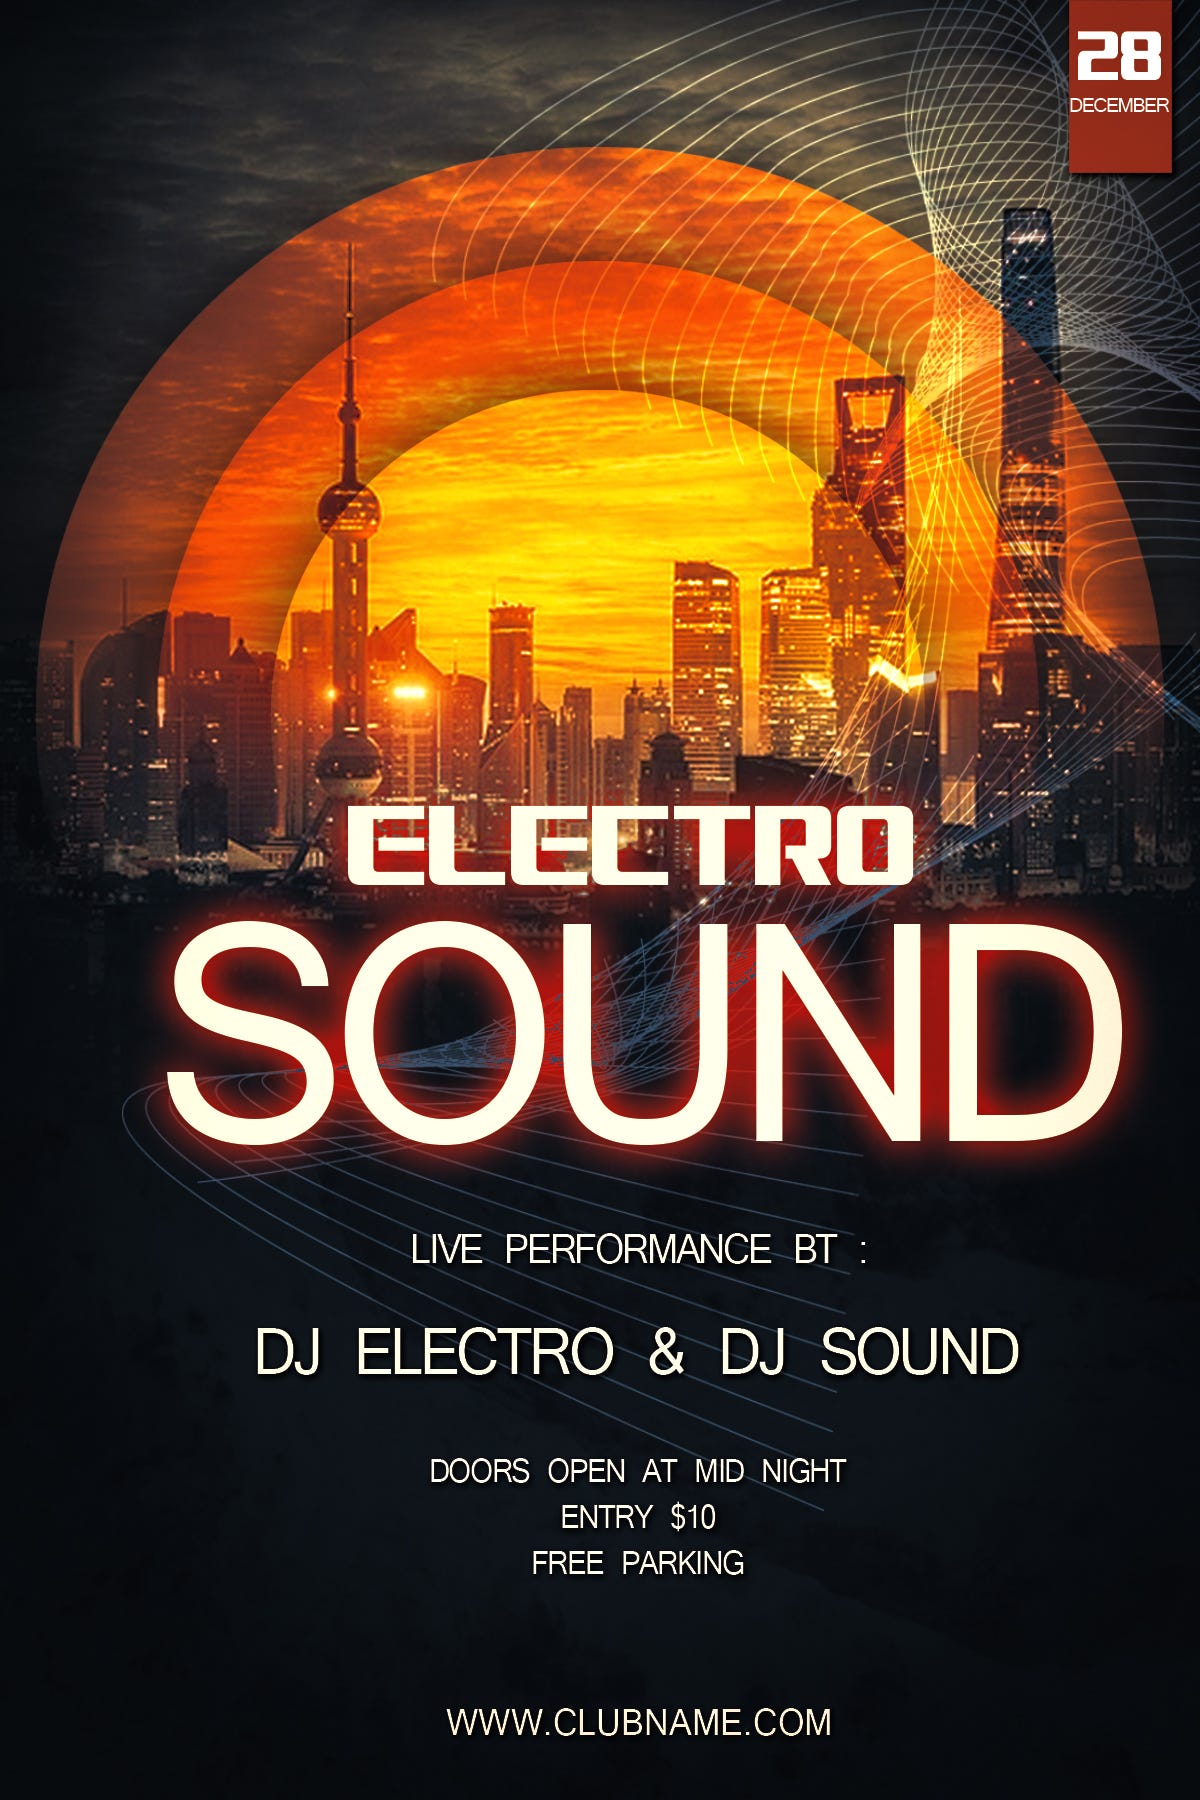 Flyer Design How To Make An Electro Flyer Design In By Photoshop Cafe Medium